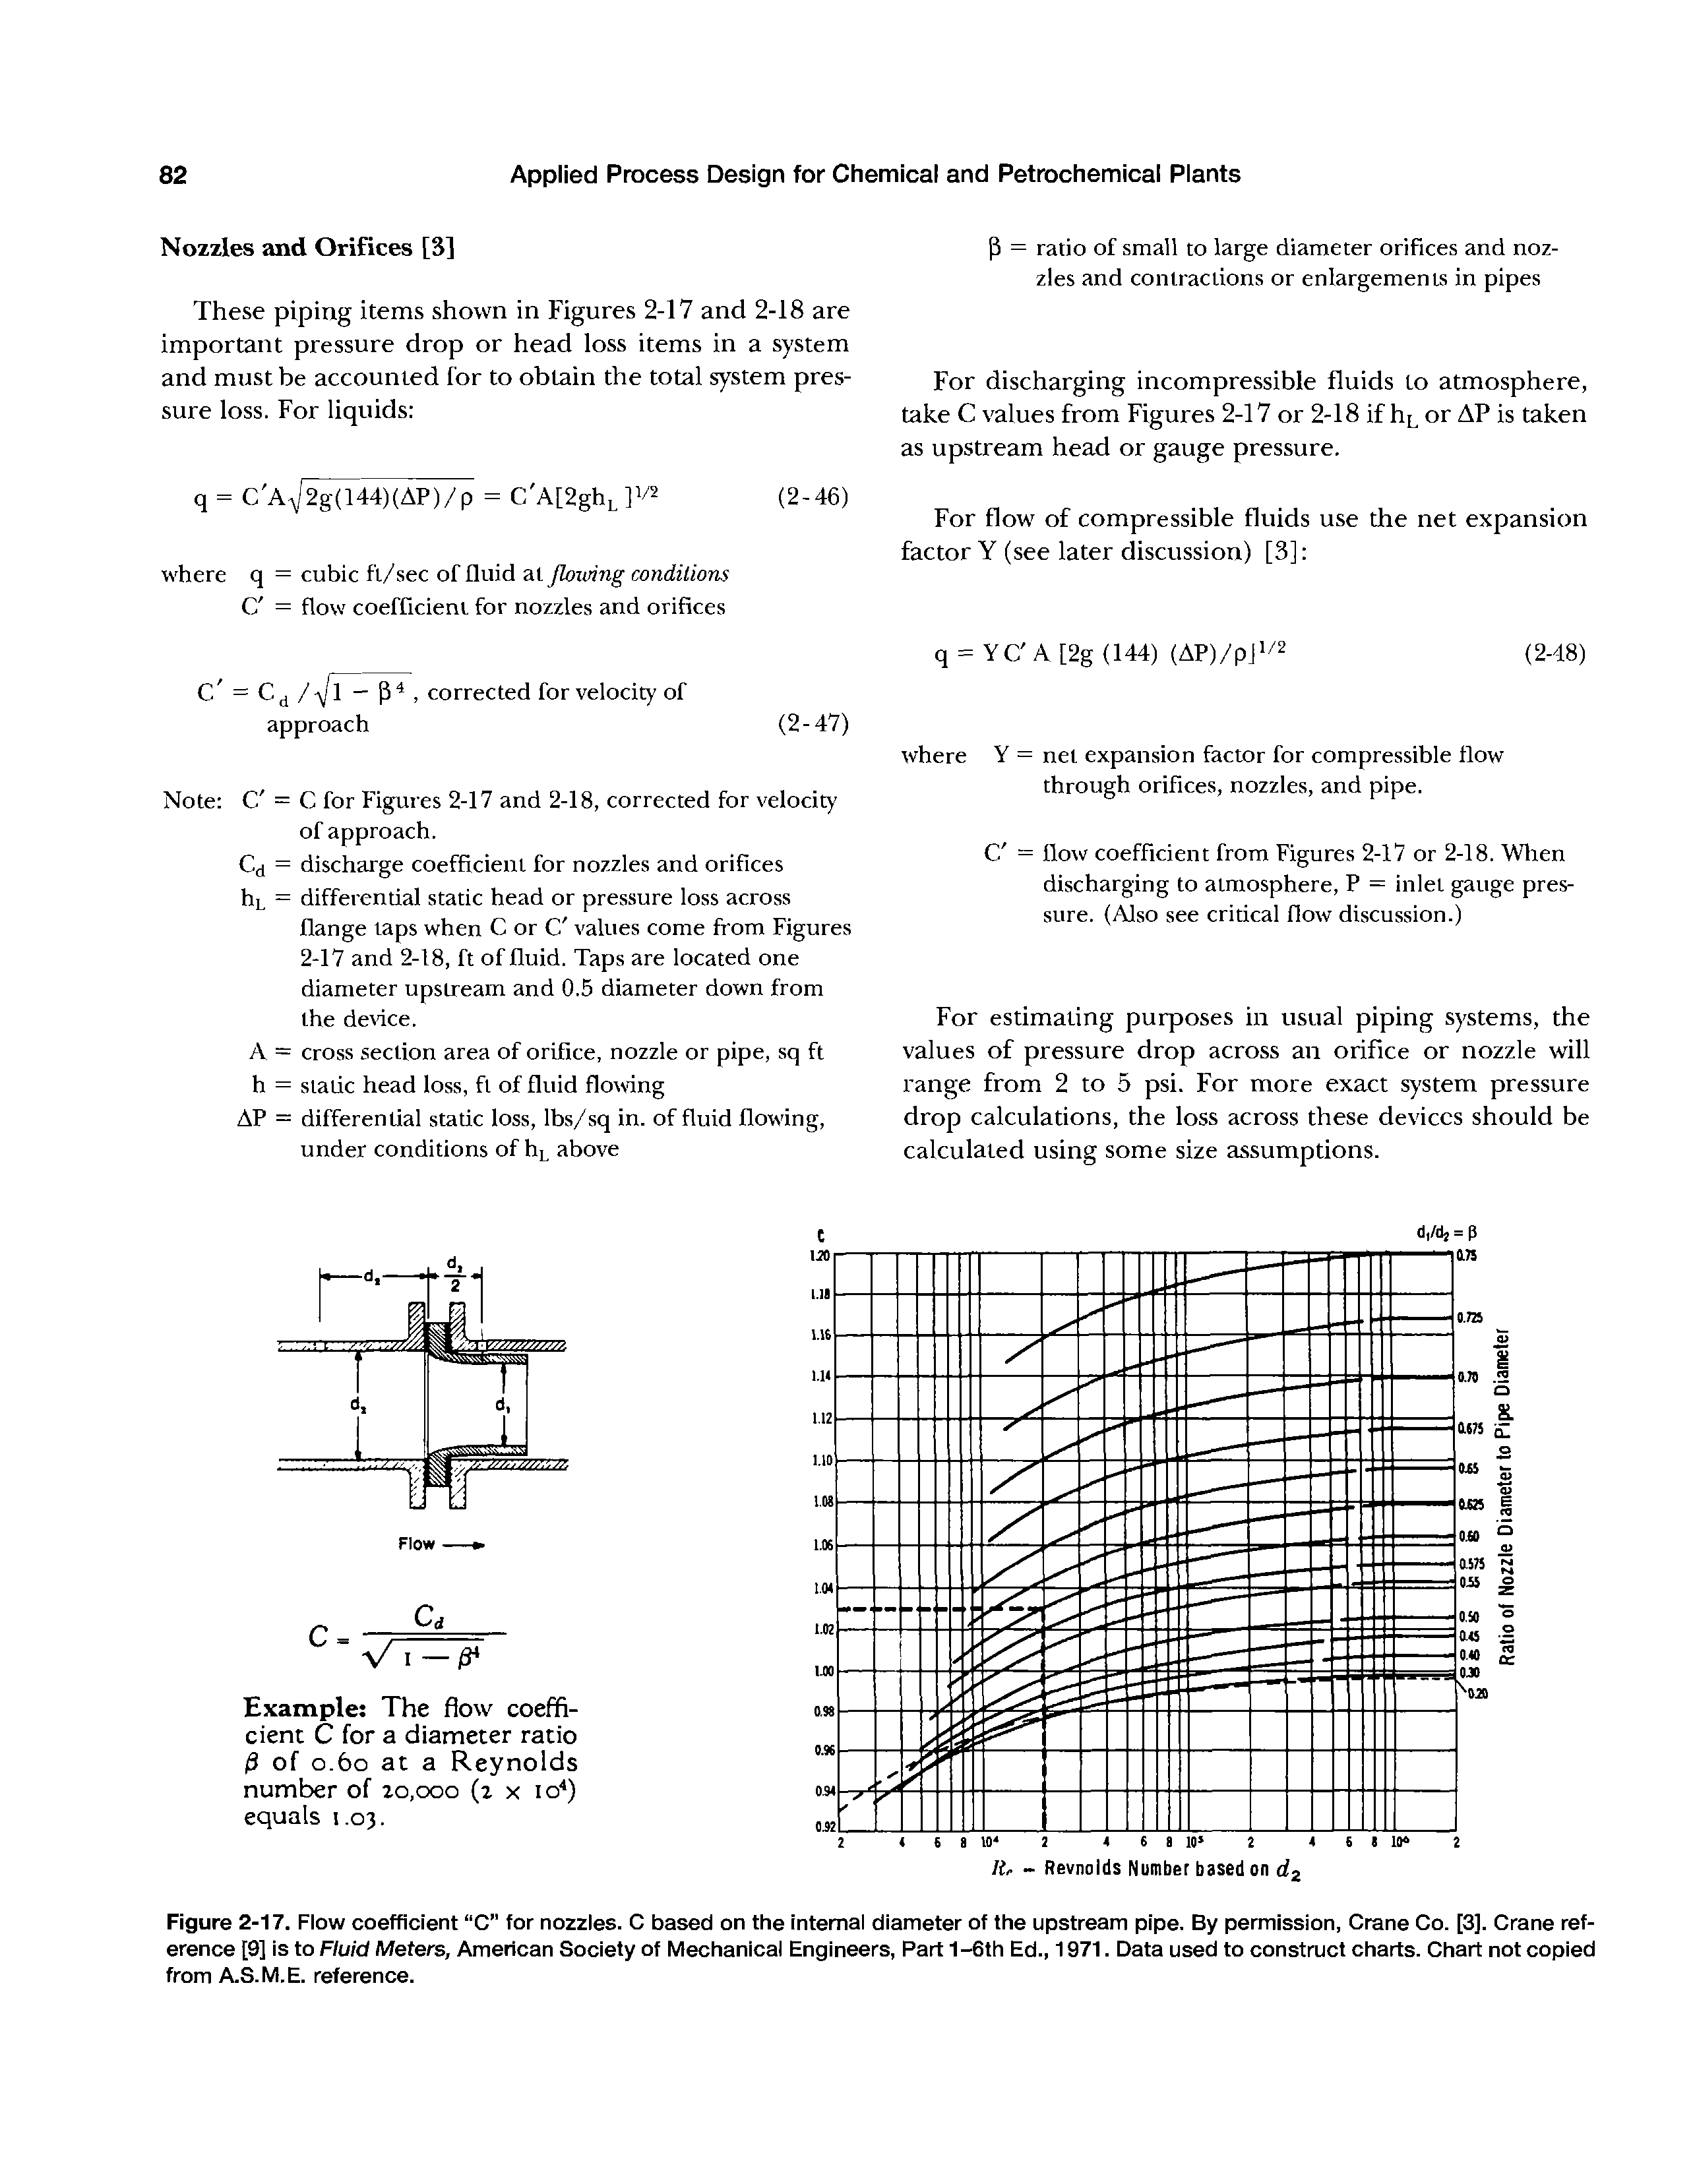 Figure 2-17. Flow coefficient C for nozzles. C based on the internal diameter of the upstream pipe. By permission, Crane Co. [3]. Crane reference [9] is to Fluid Meters, American Society of Mechanical Engineers, Part 1-6th Ed., 1971. Data used to construct charts. Chart not copied from A.S.M.E. reference.